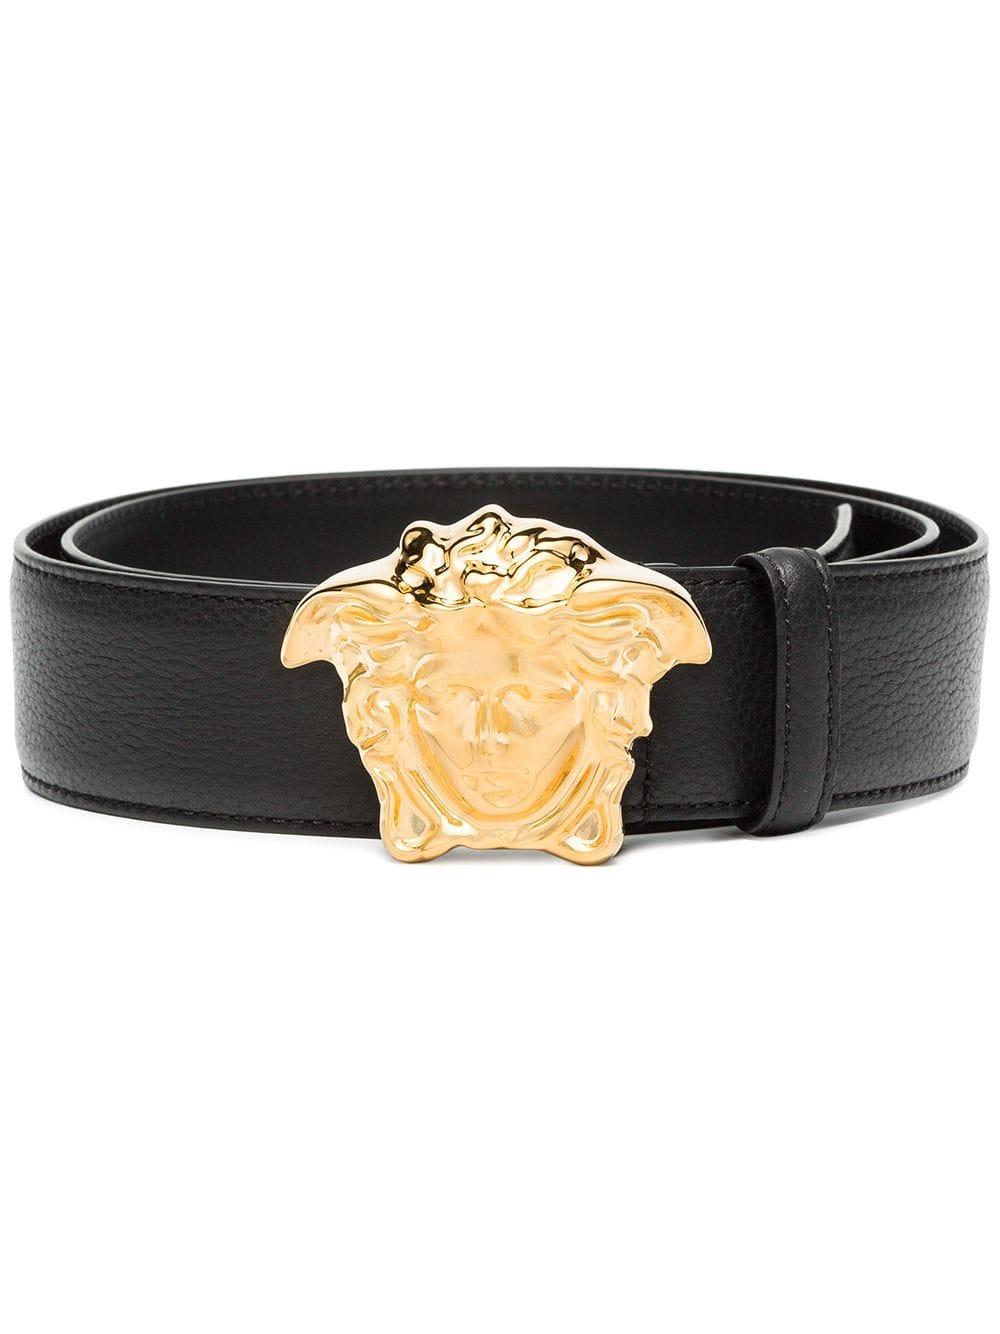 Versace Leather Palazzo Belt With Medusa Buckle in Black for Men - Save ...